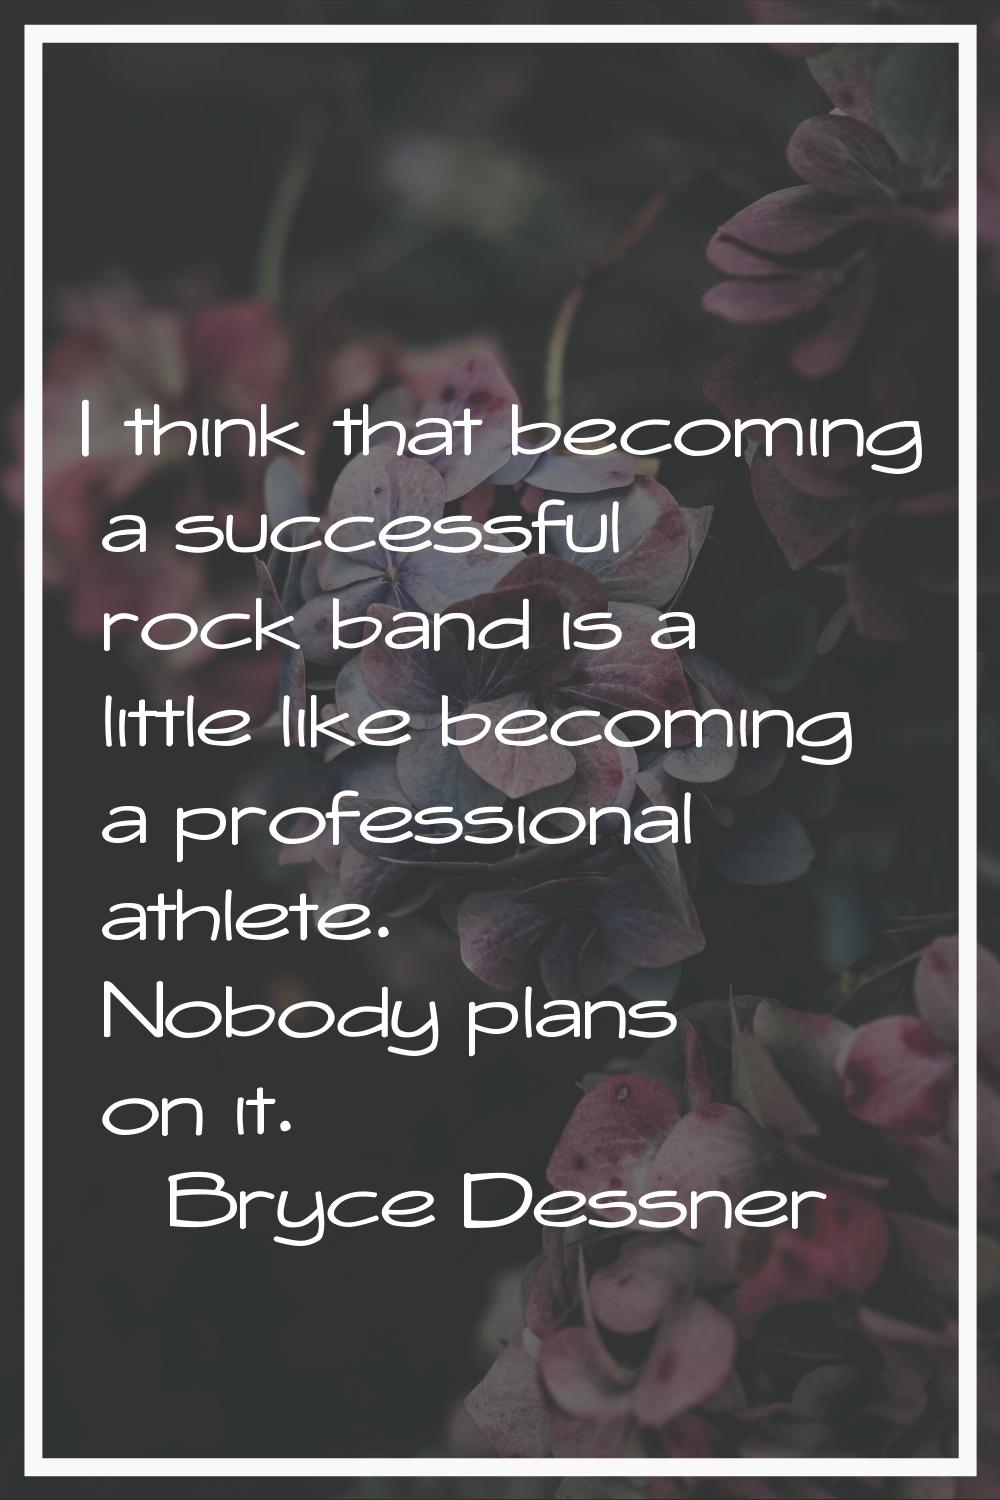 I think that becoming a successful rock band is a little like becoming a professional athlete. Nobo